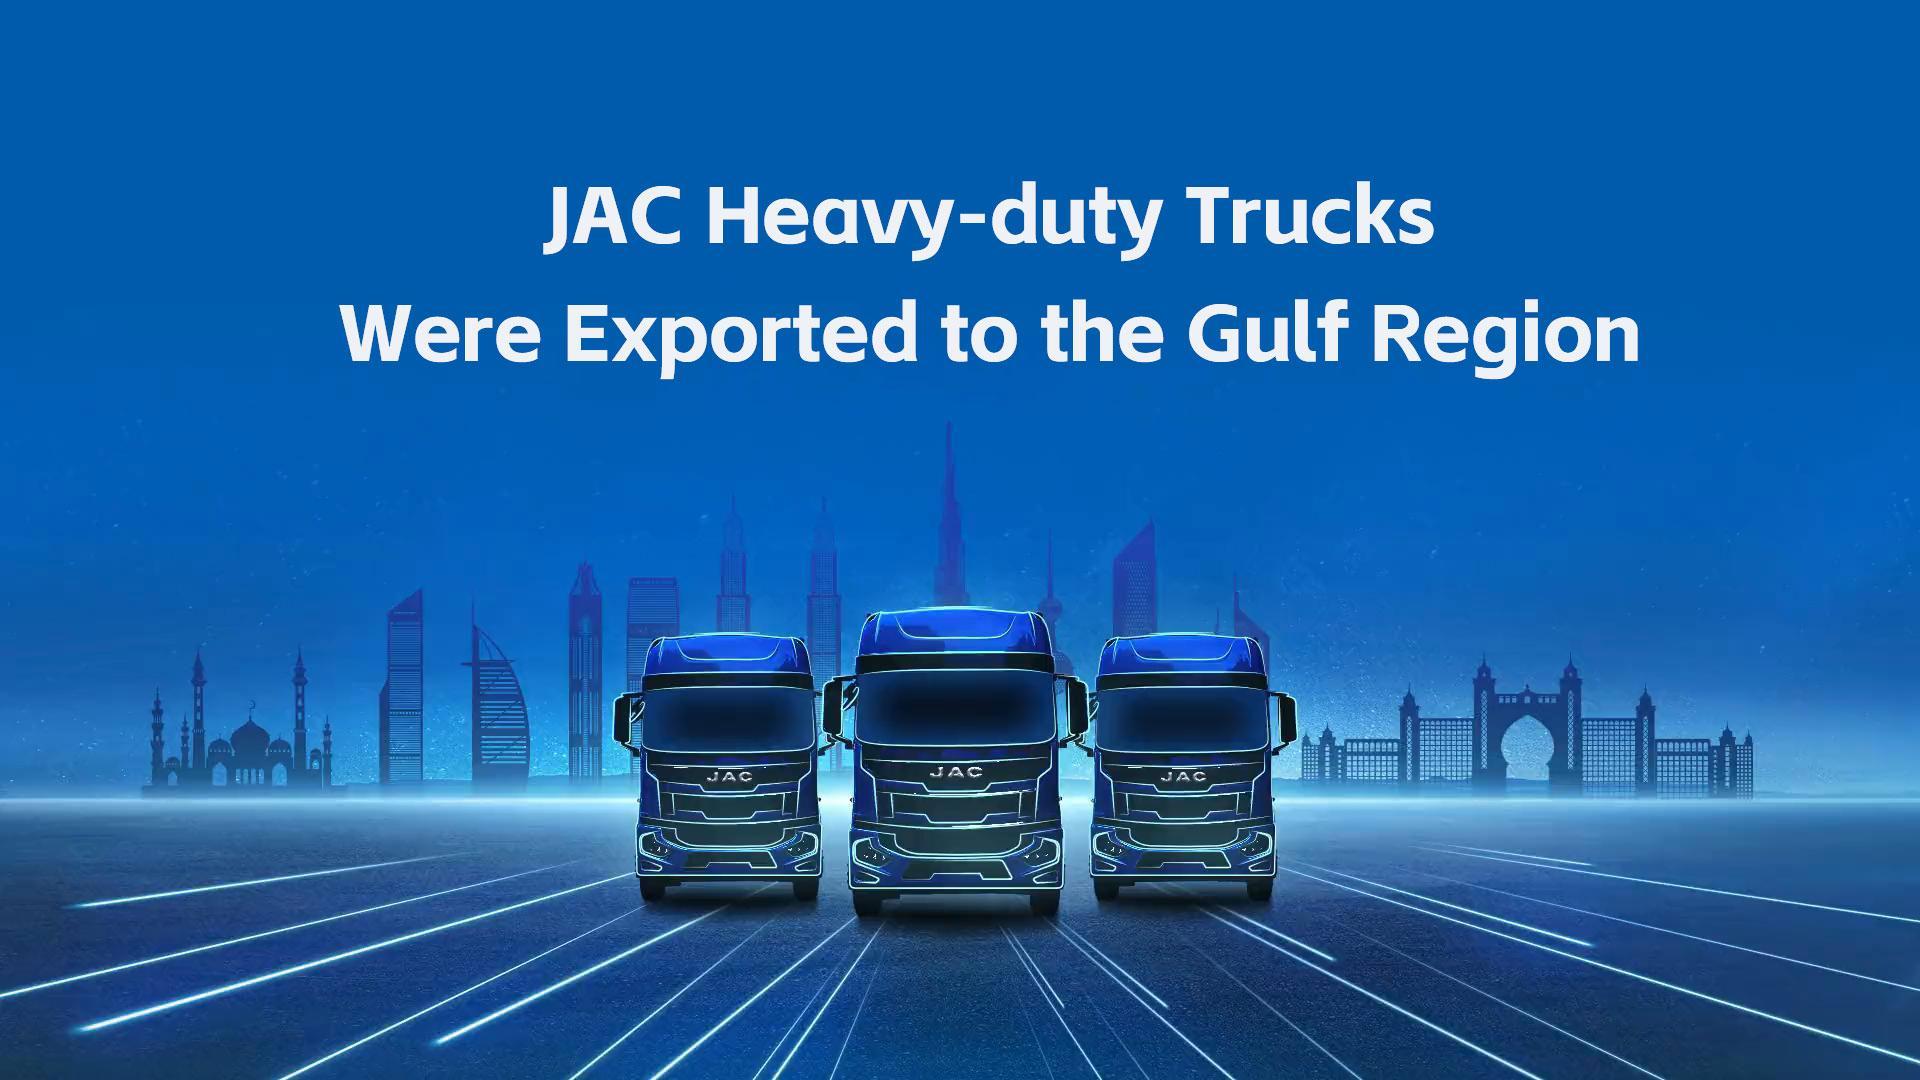 JAC Heavy-duty Trucks Were Exported to the Gulf Region